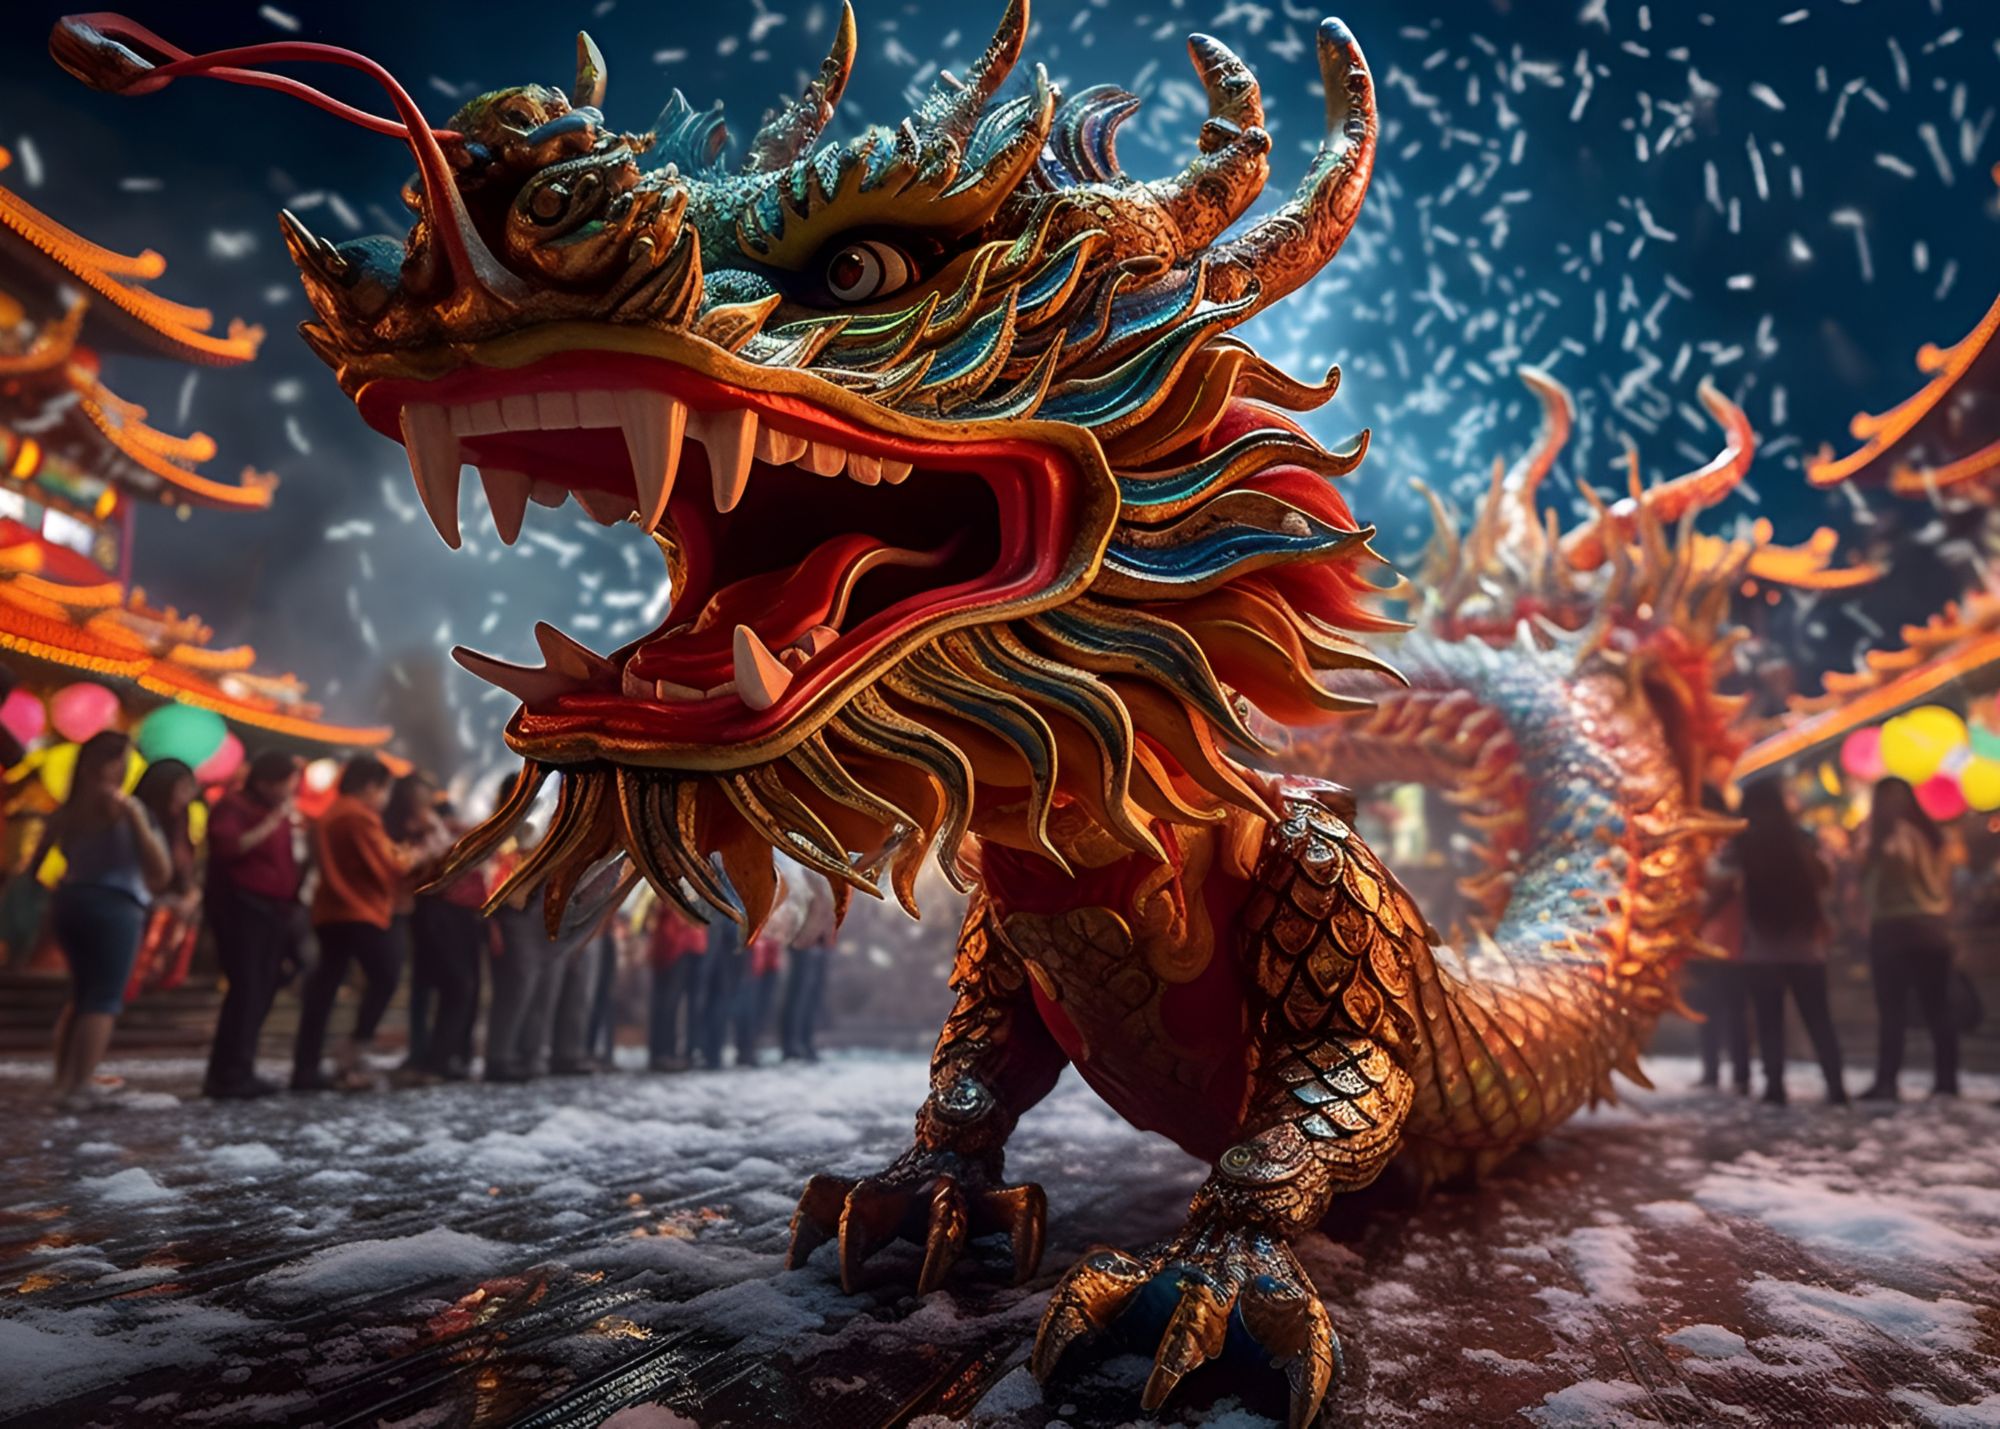 An AI-generated image of a Chinese New Year parade with a dragon surrounded by a crowd.